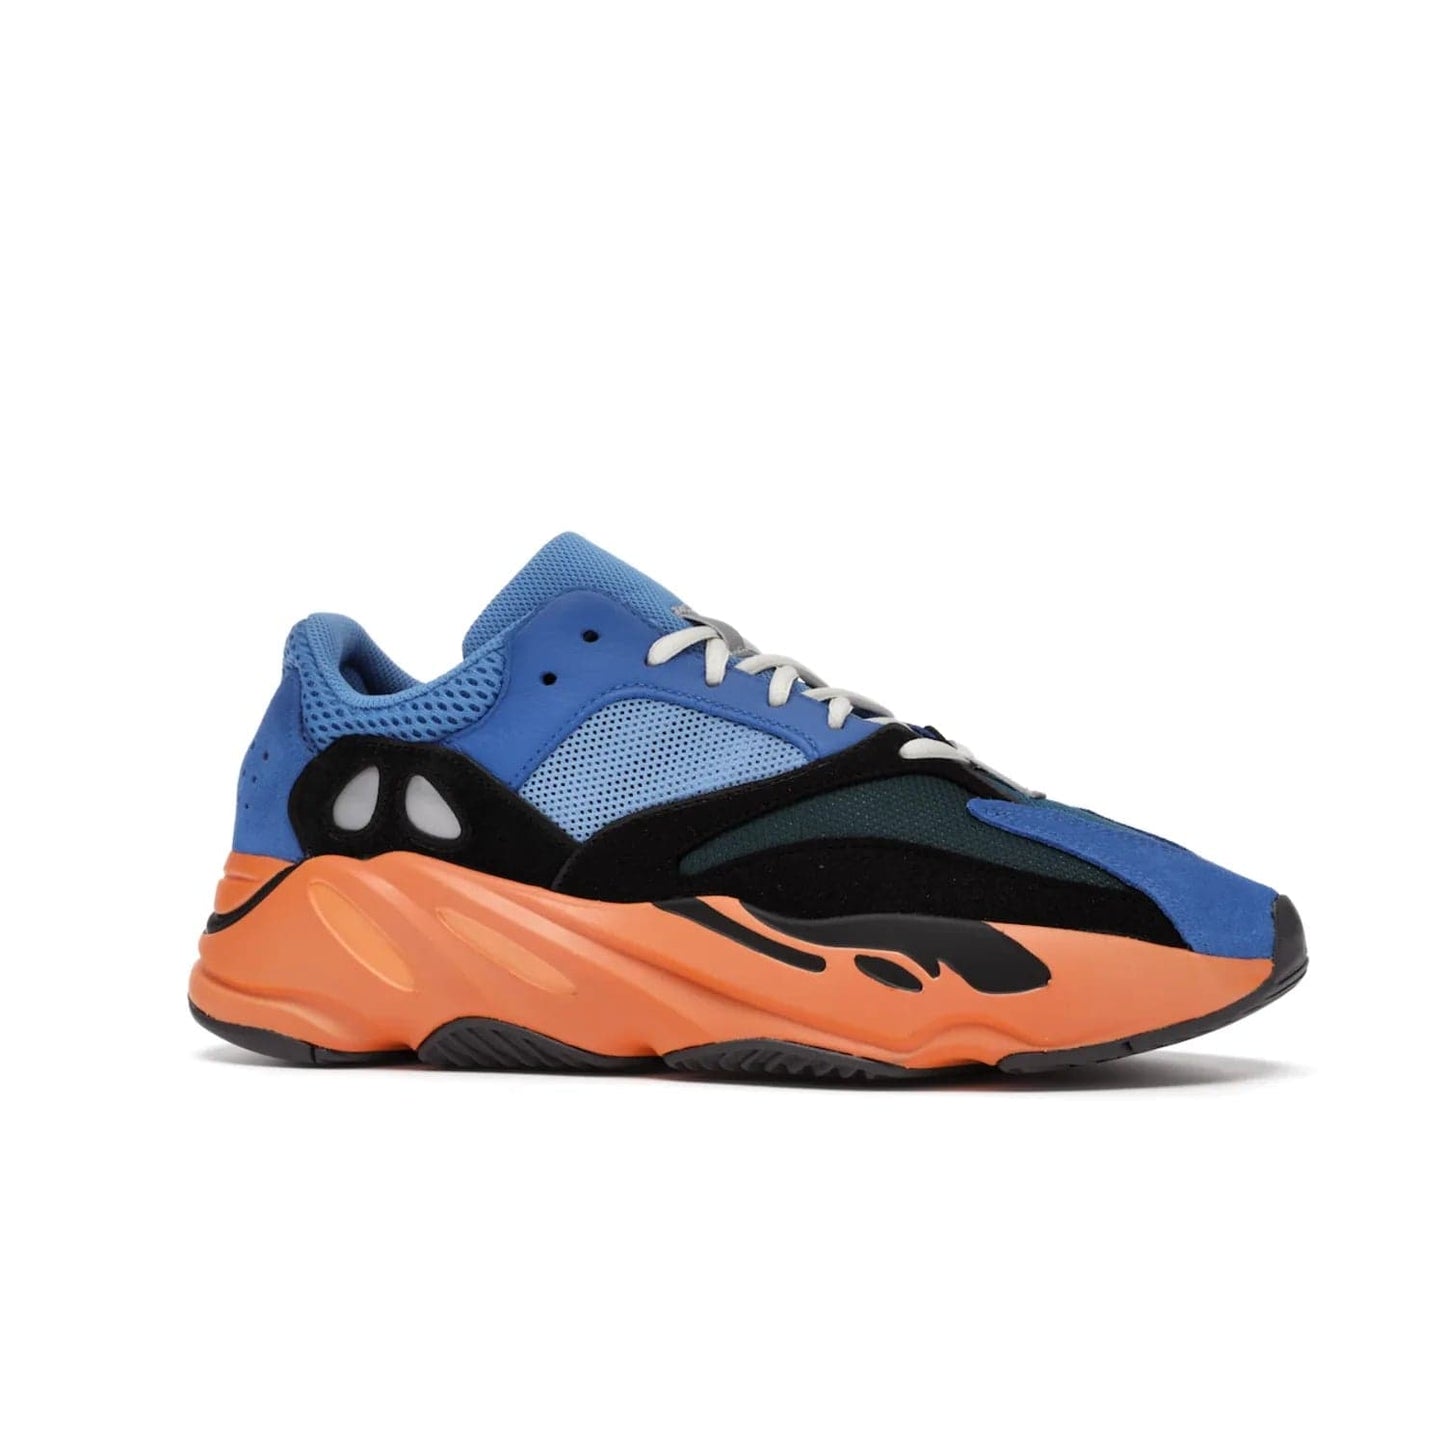 adidas Yeezy Boost 700 Bright Blue - Image 3 - Only at www.BallersClubKickz.com - Iconic sneaker style meets vibrant colour with the adidas Yeezy Boost 700 Bright Blue. Reflective accents, turquoise and teal panels, bright orange midsole and black outsole make for a bold release. April 2021.